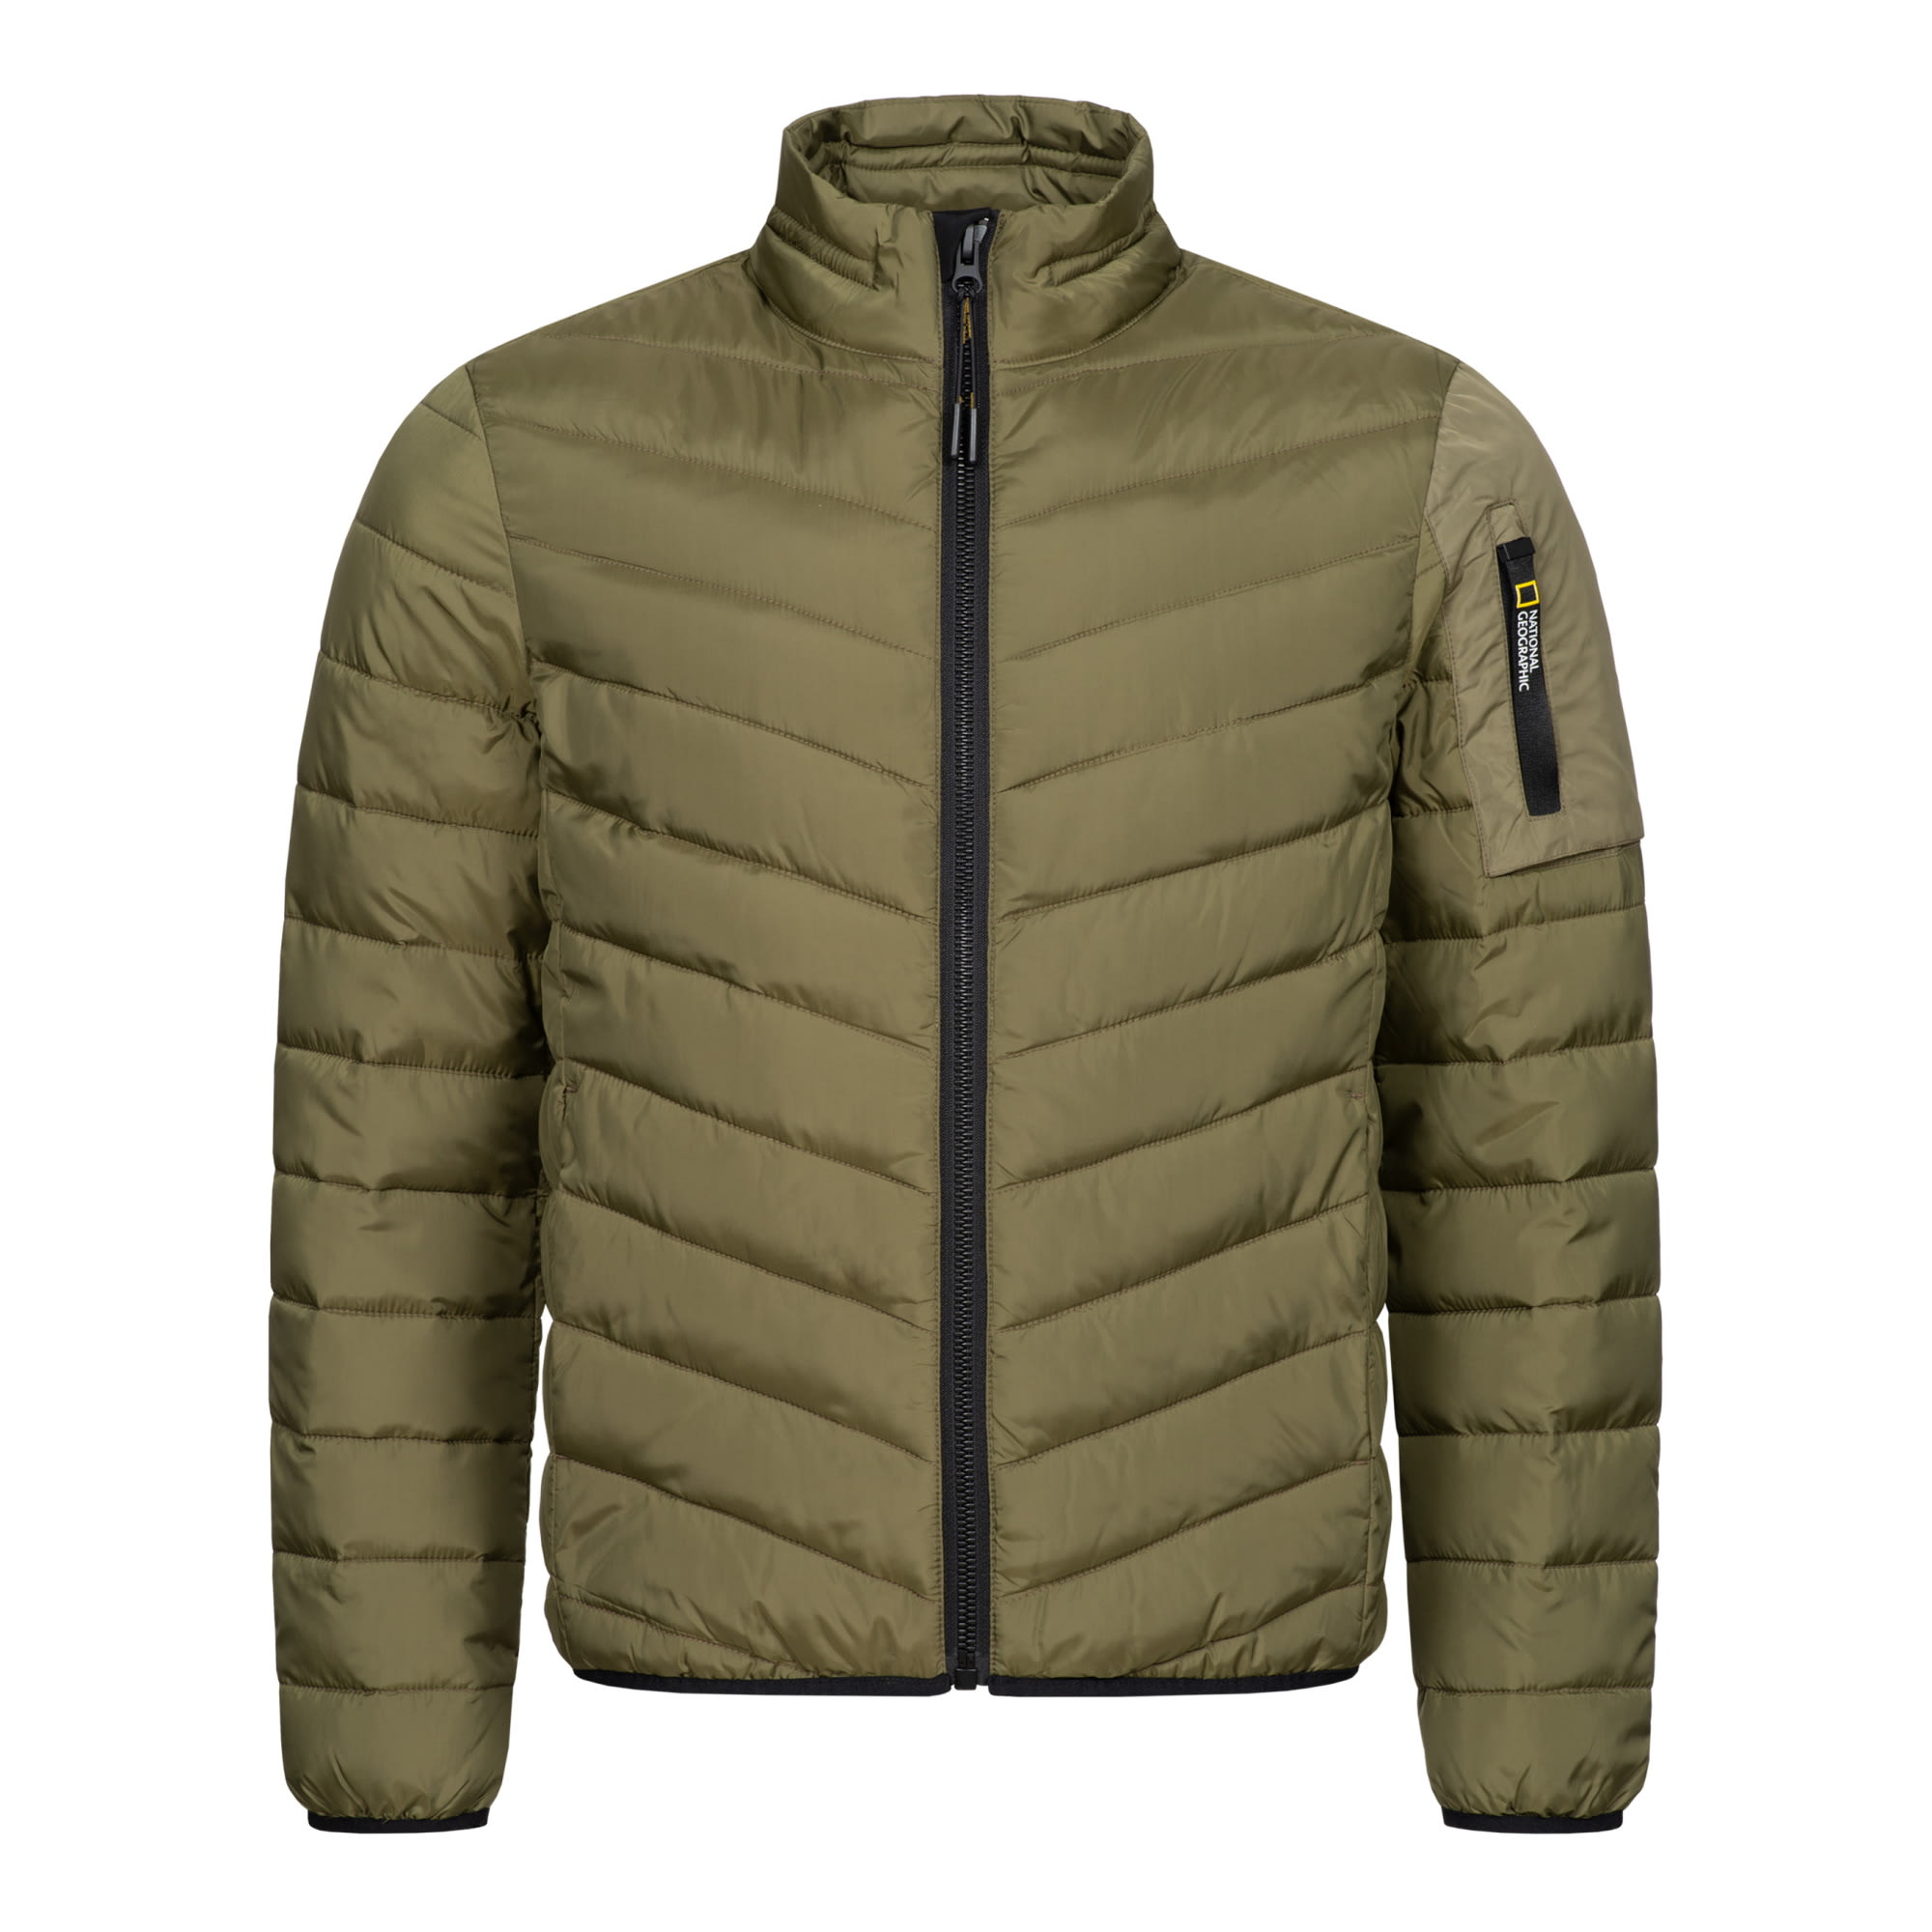 Buy National Geographic Men's Puffer Jacket from Outnorth